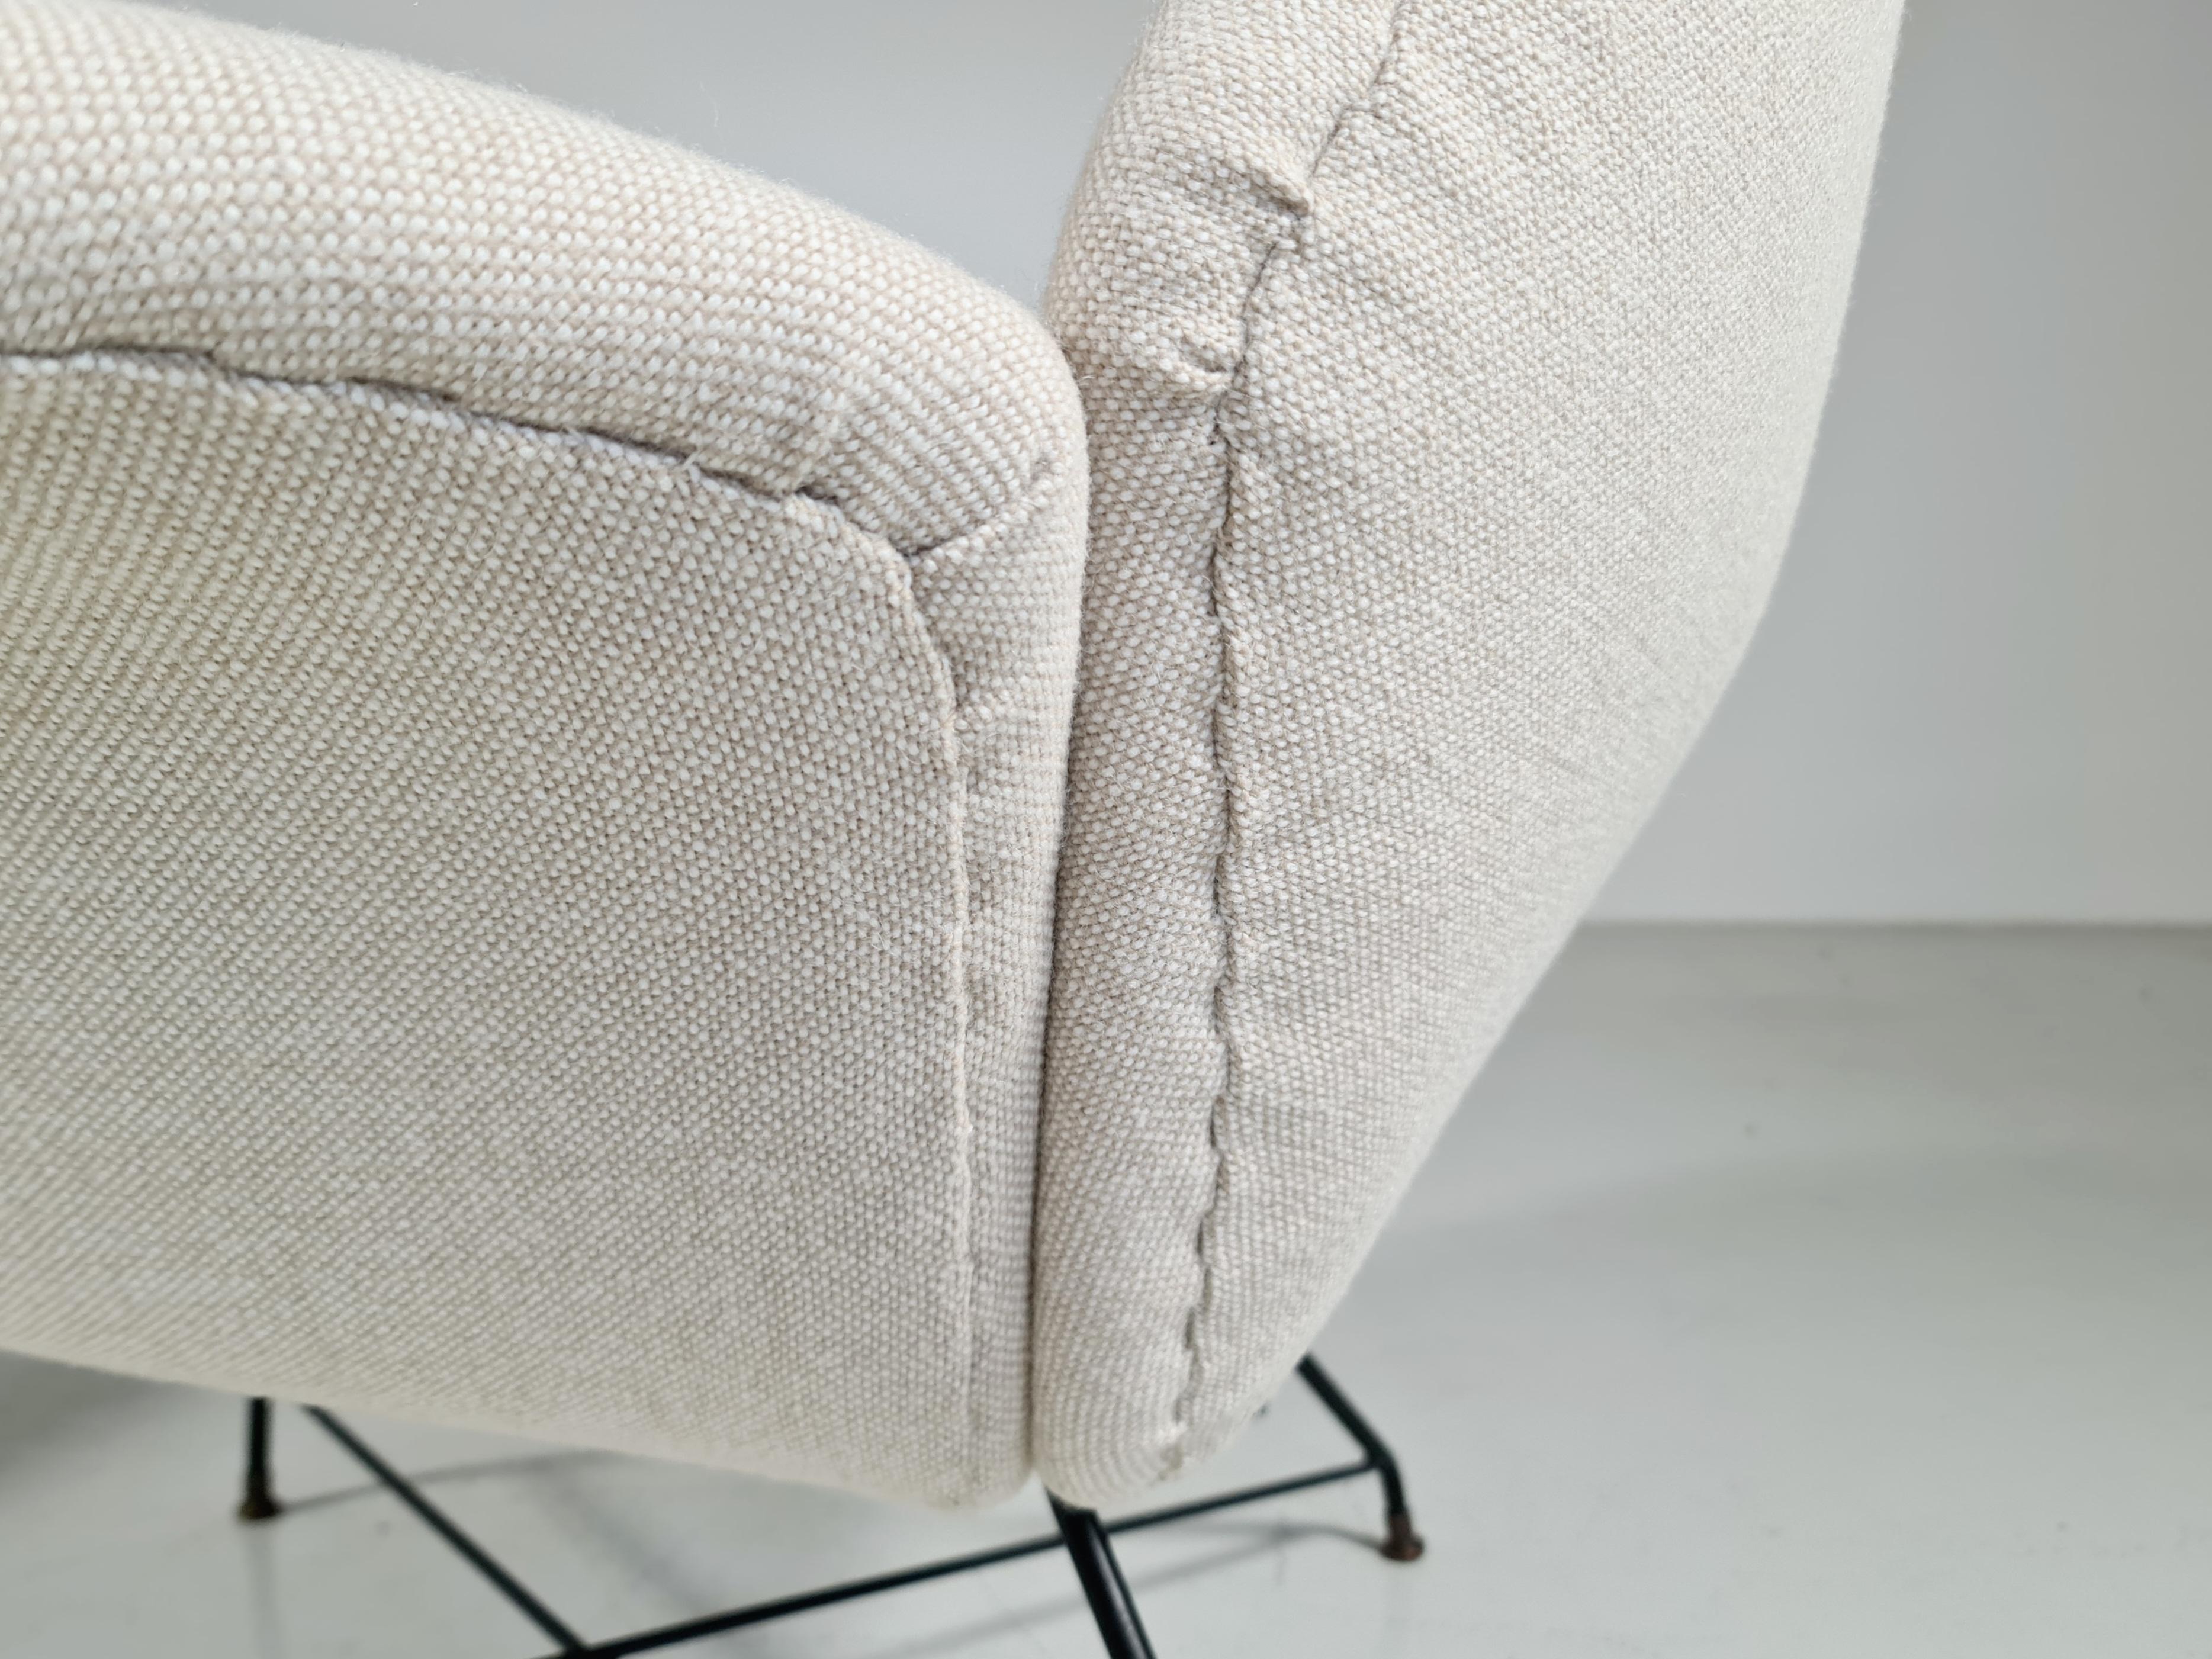 ‘Lotus’ Lounge Chairs in cream wool fabric by Augusto Bozzi for Saporiti, 1960s For Sale 2